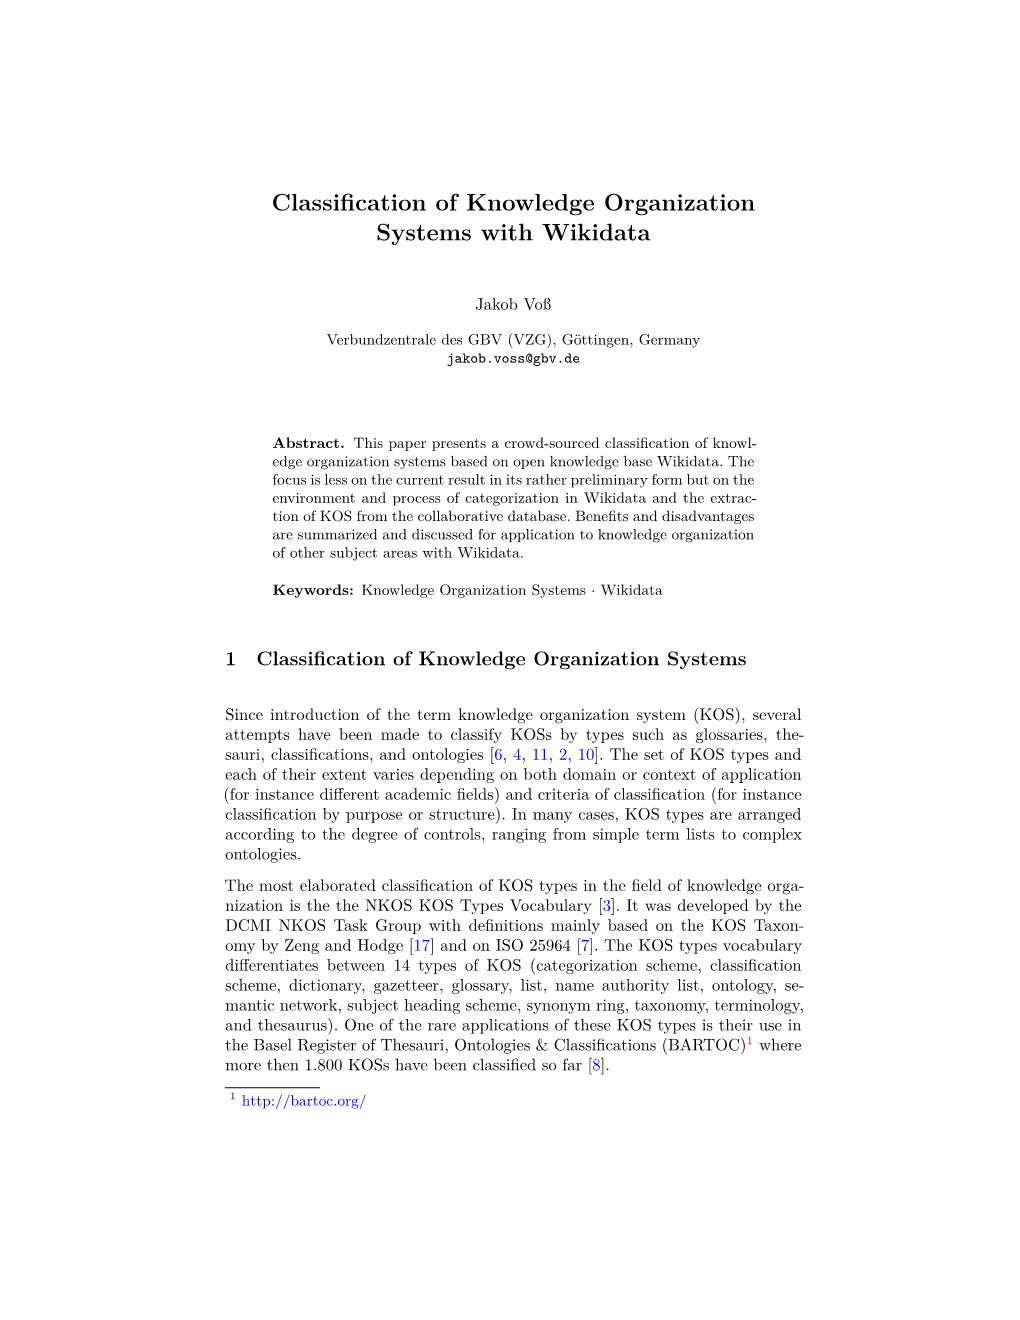 Classification of Knowledge Organization Systems with Wikidata